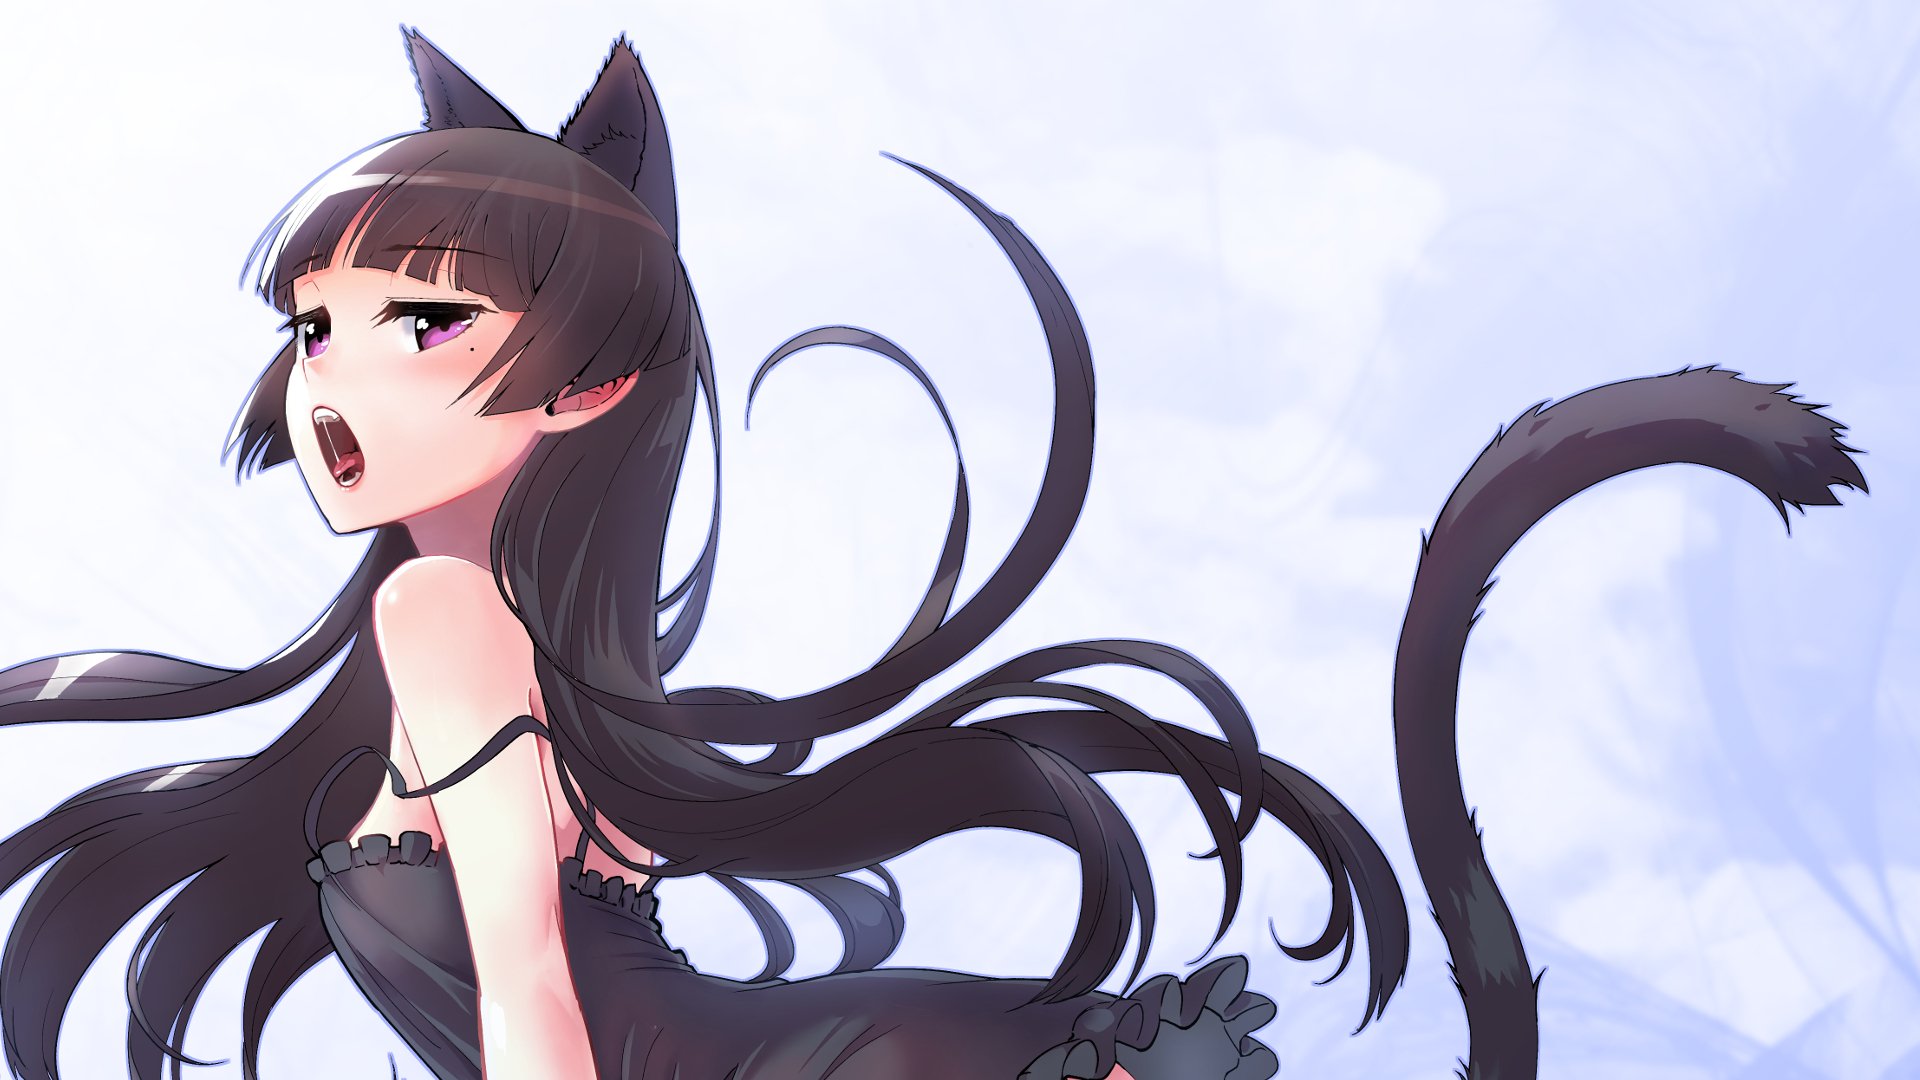 Tons of awesome lewd anime wallpapers to download for free. 